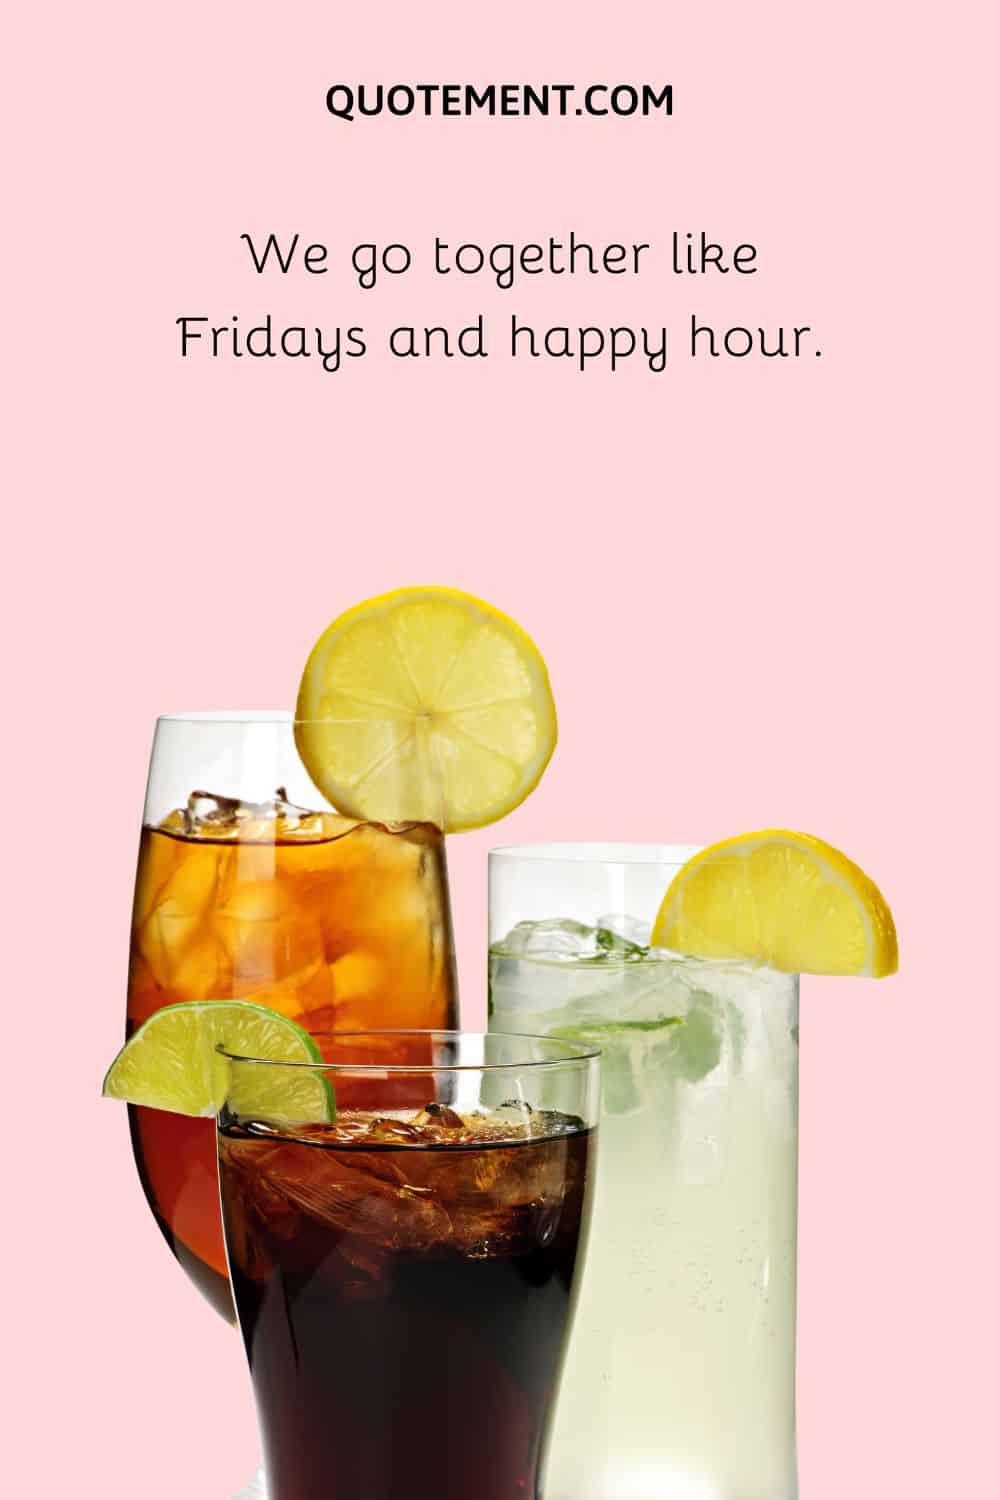 We go together like Fridays and happy hour.